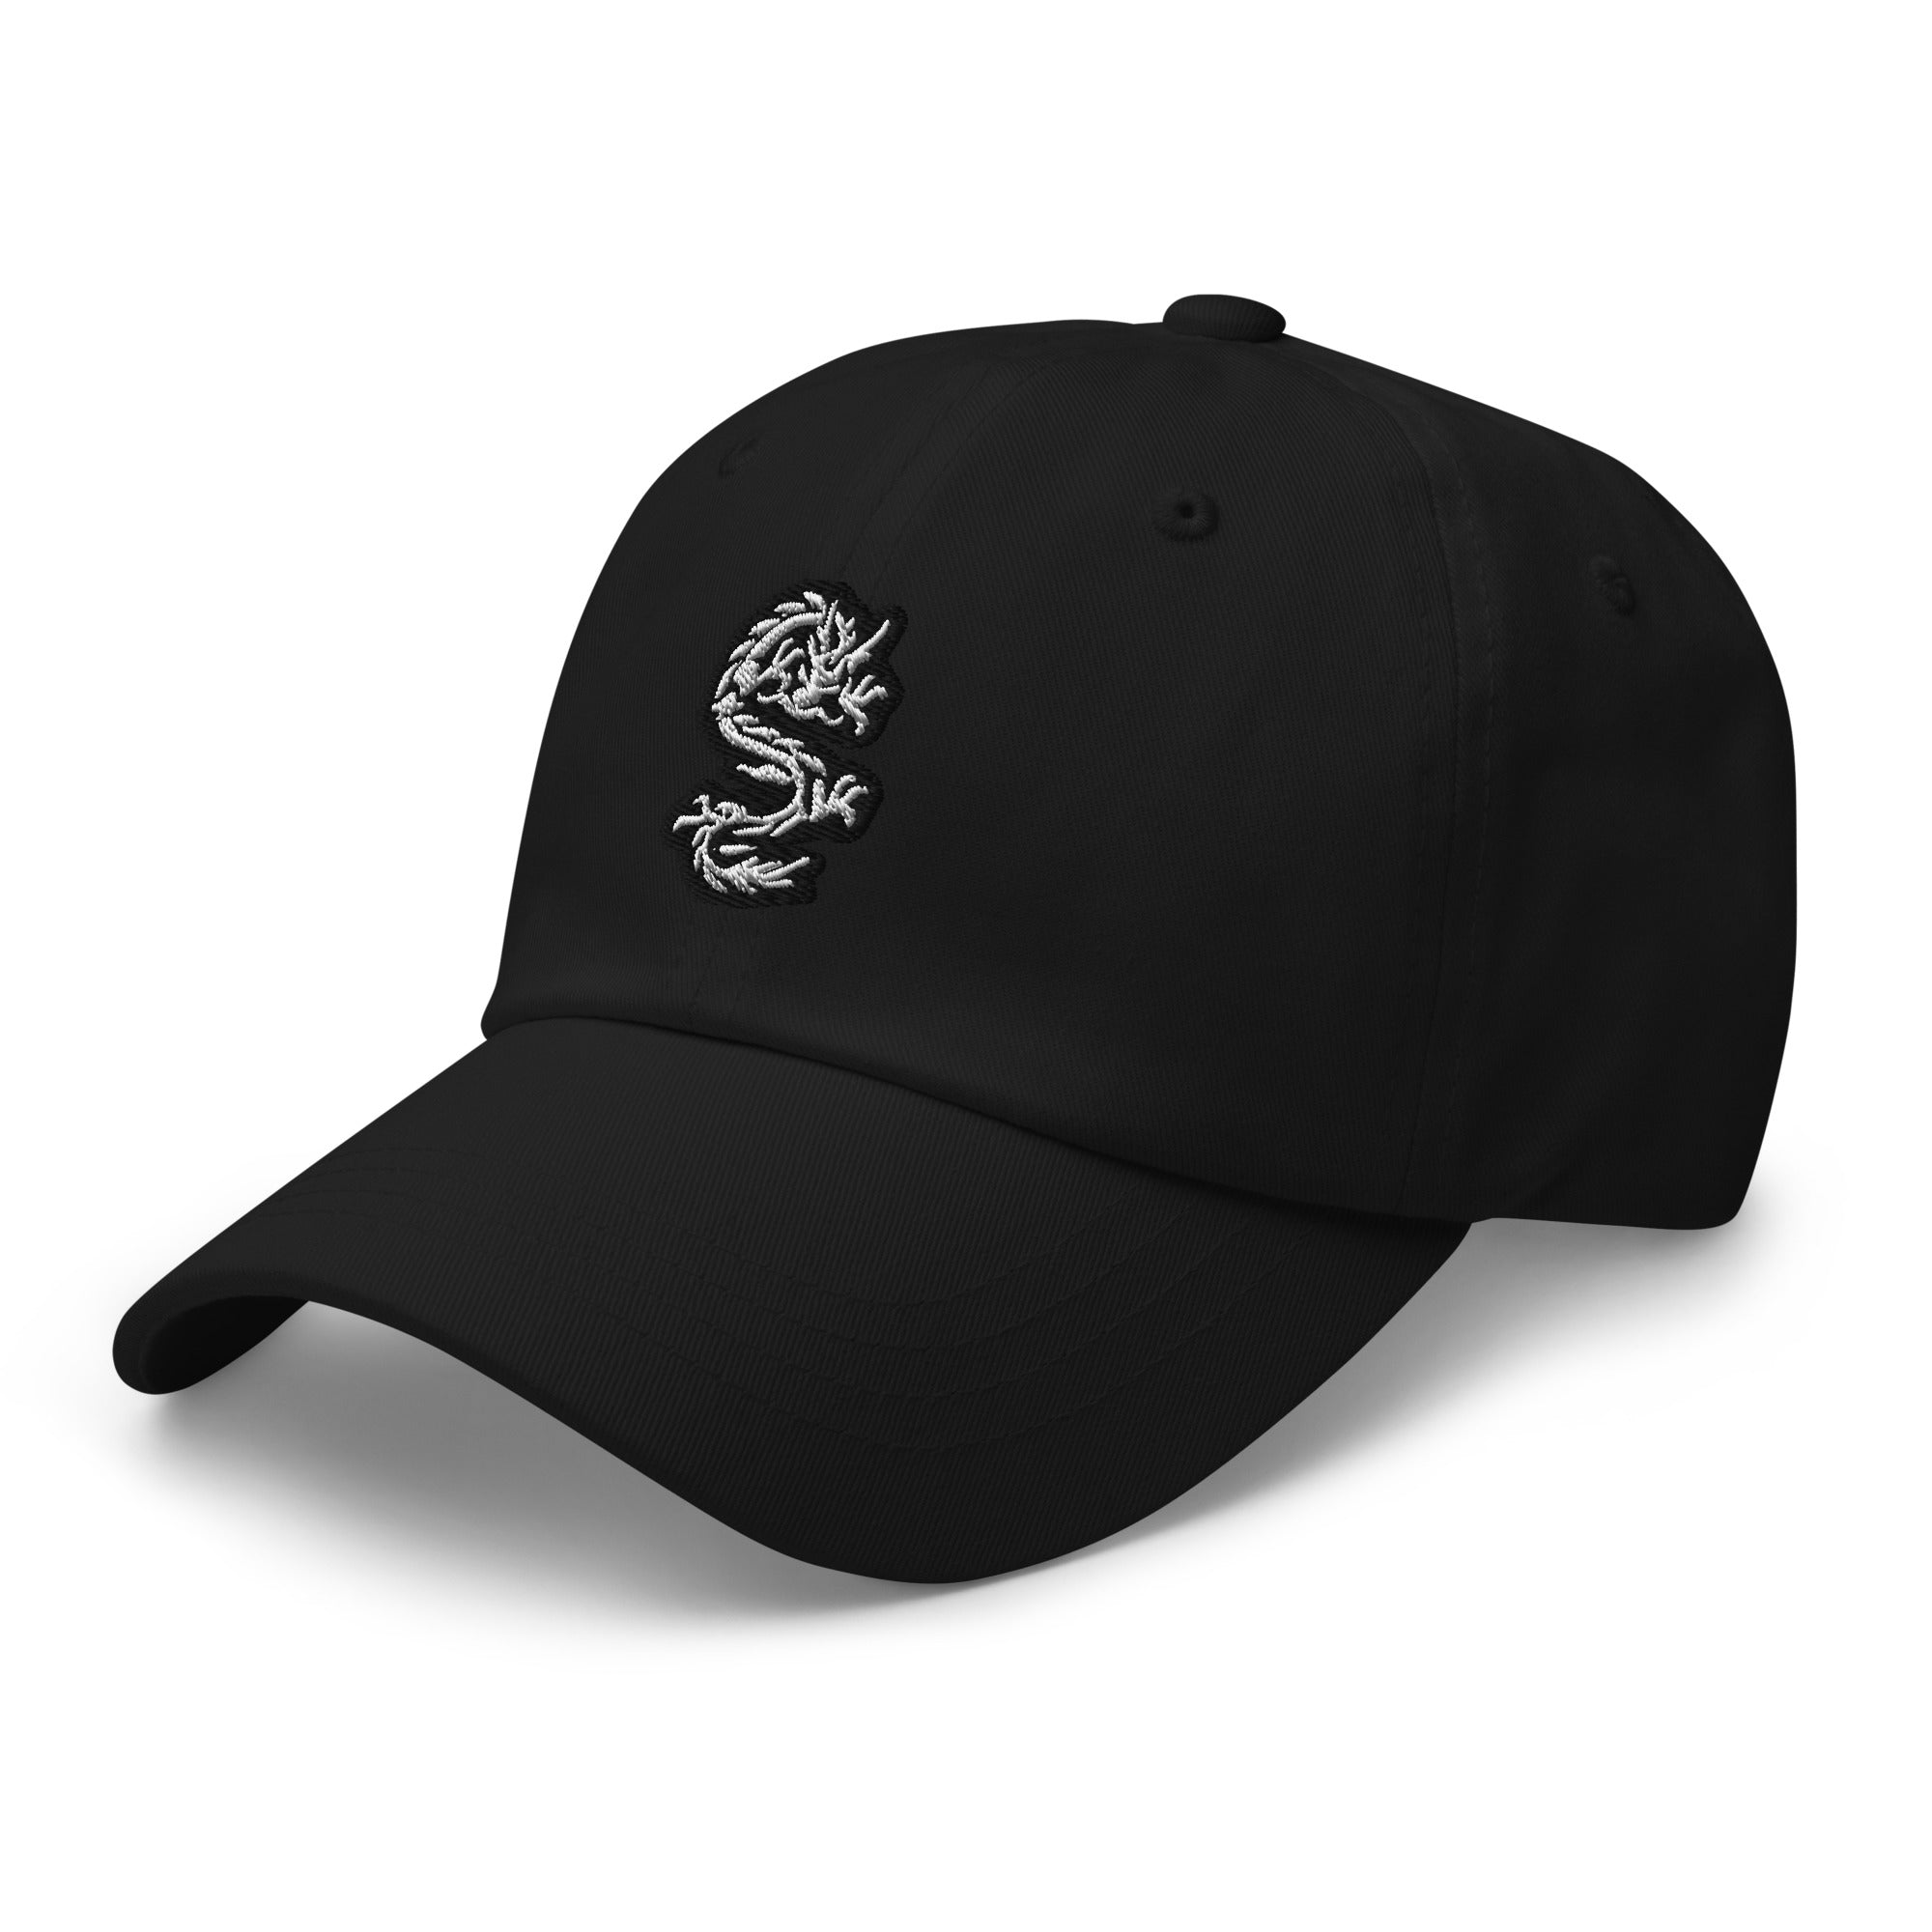 Ancient Chinese Dragon Embroidered Baseball Cap Mythology and Folklore Dad hat - Edge of Life Designs